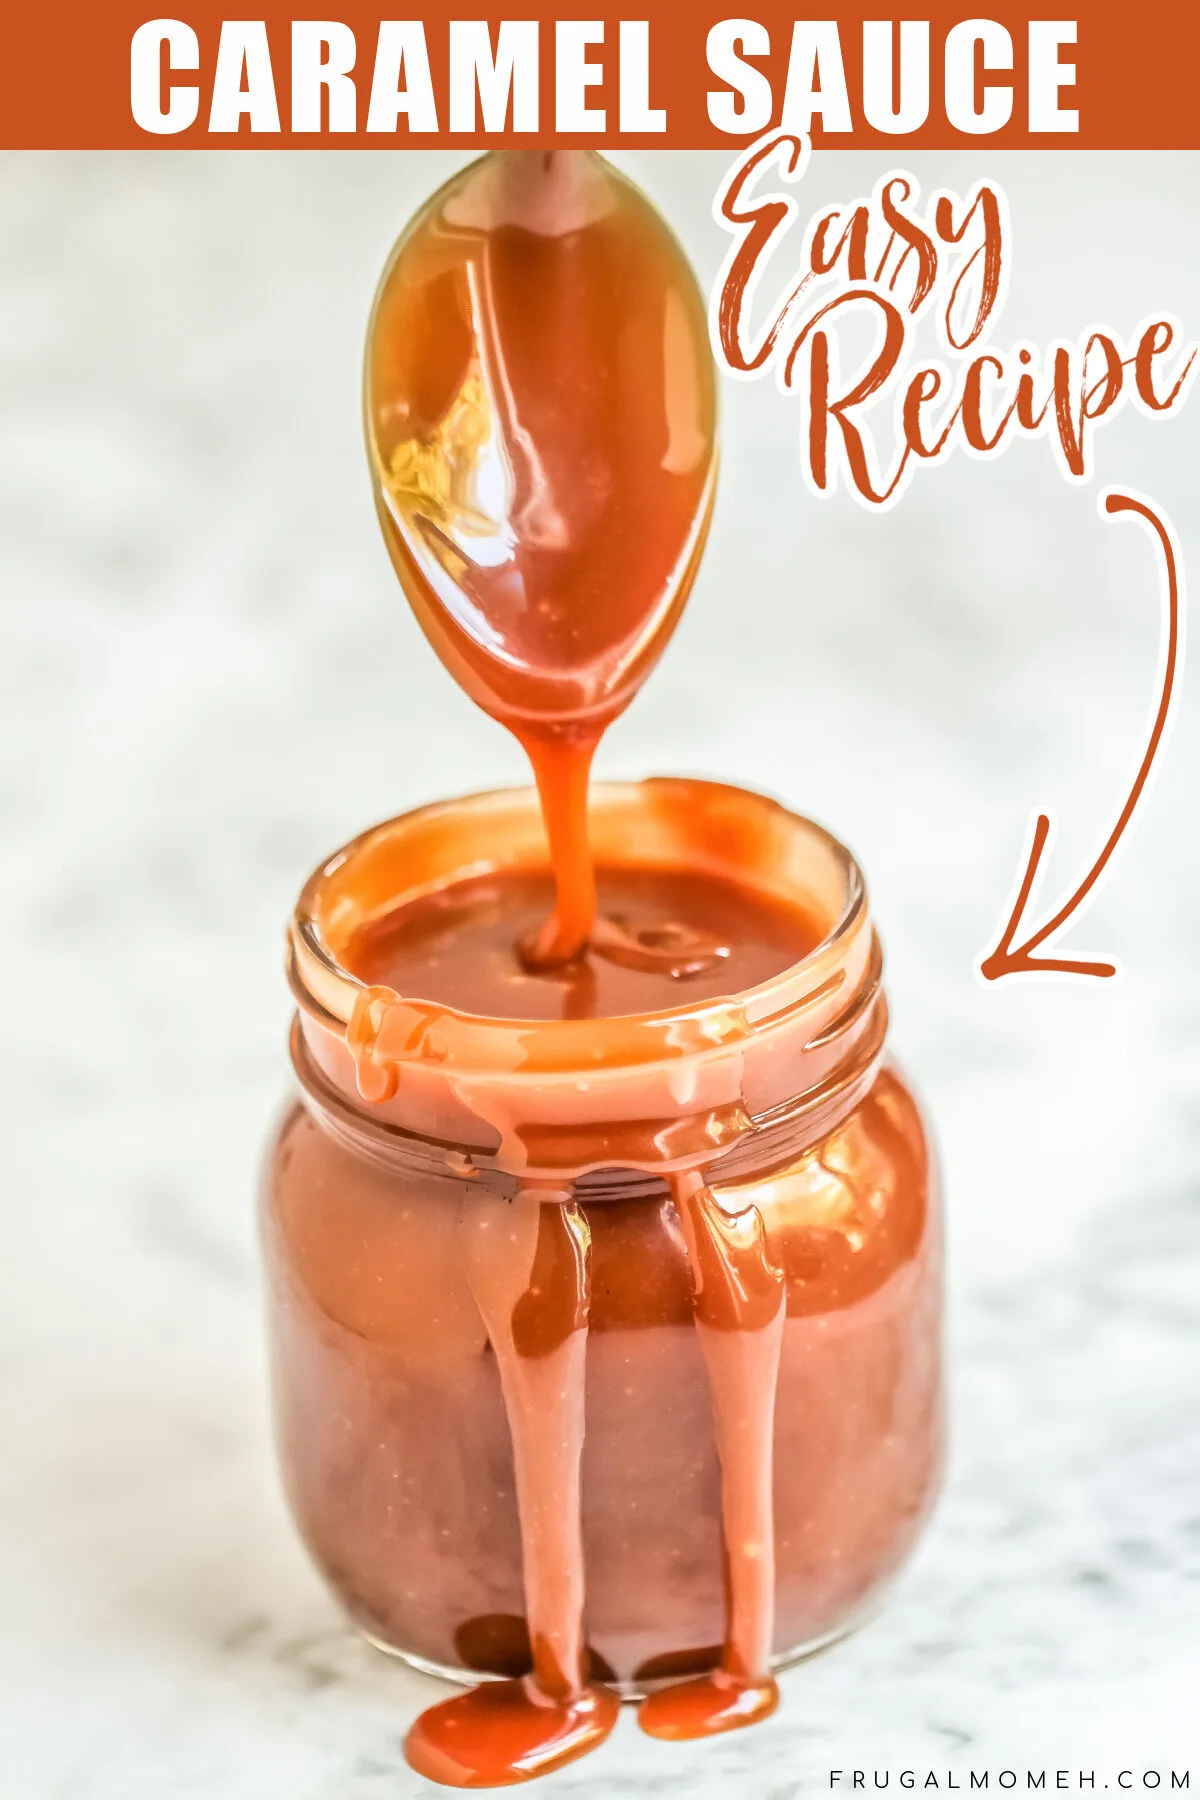 This Easy Homemade Caramel Sauce Recipe uses just a handful of ingredients & the wet caramelization method to make perfect creamy caramel.